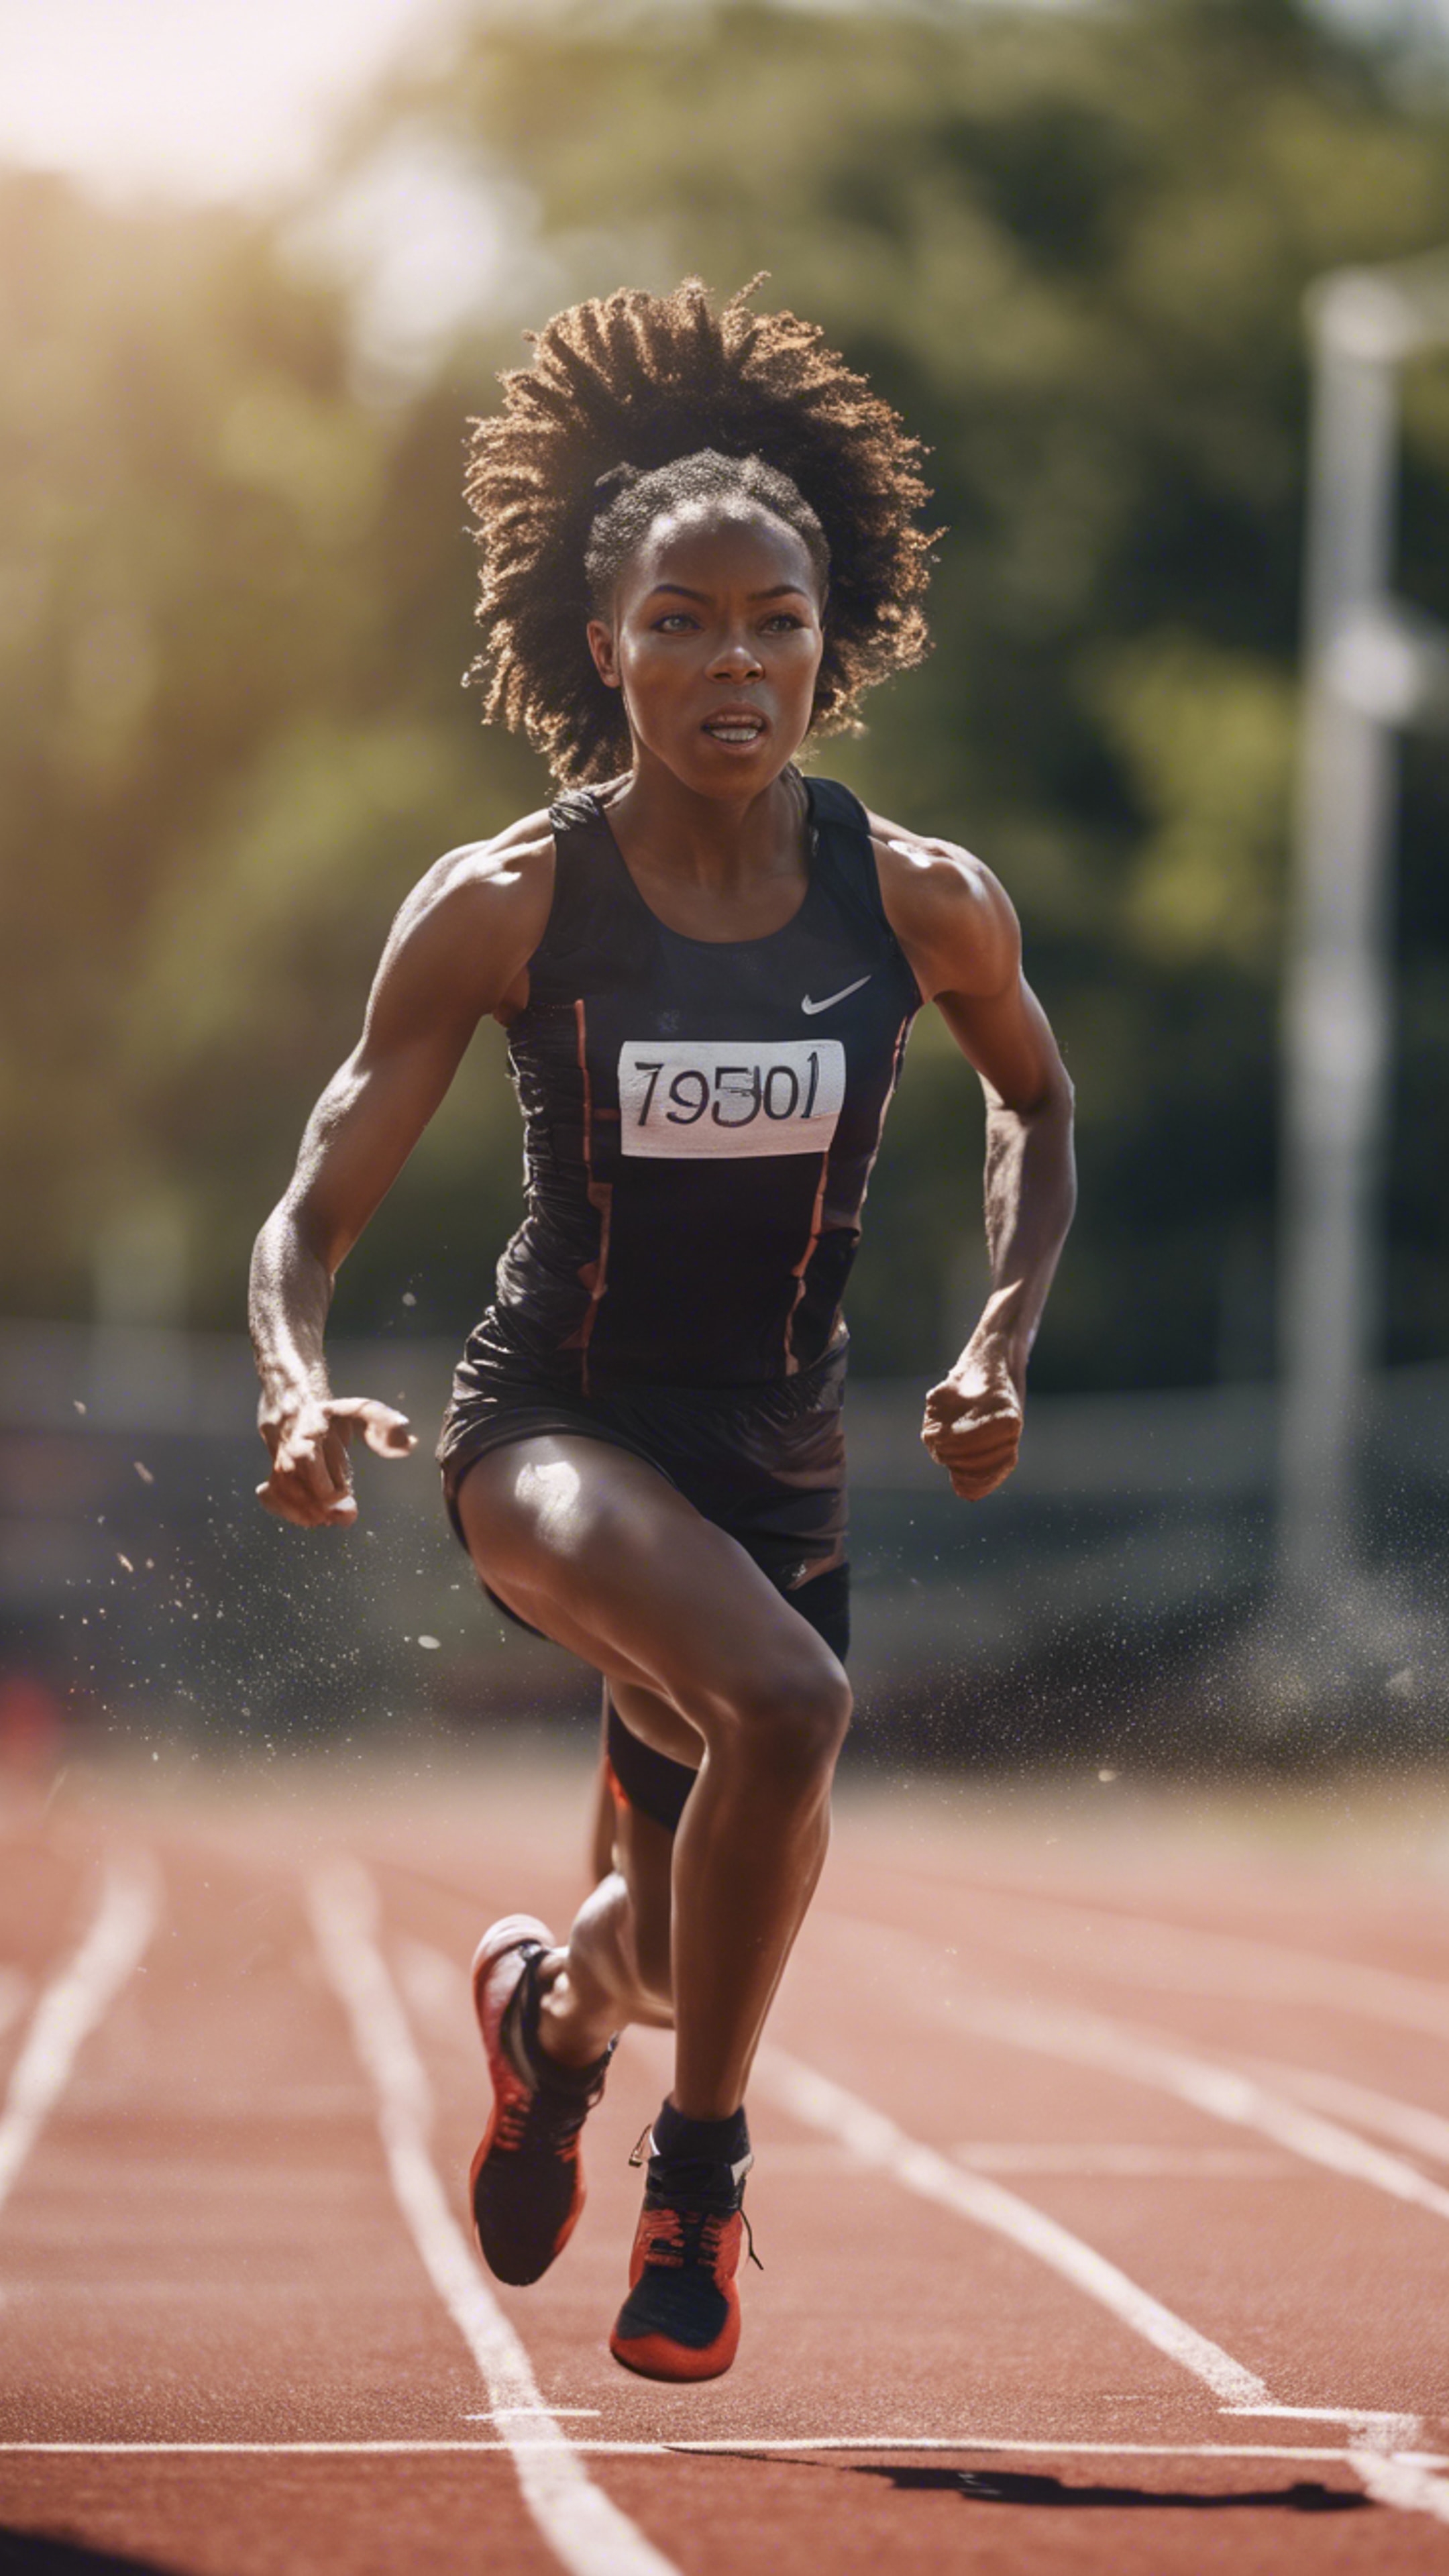 A dynamic image of a black girl engaging in competitive sprint, showing her vital energy. ផ្ទាំង​រូបភាព[76eb5b44f4a84b498fc2]